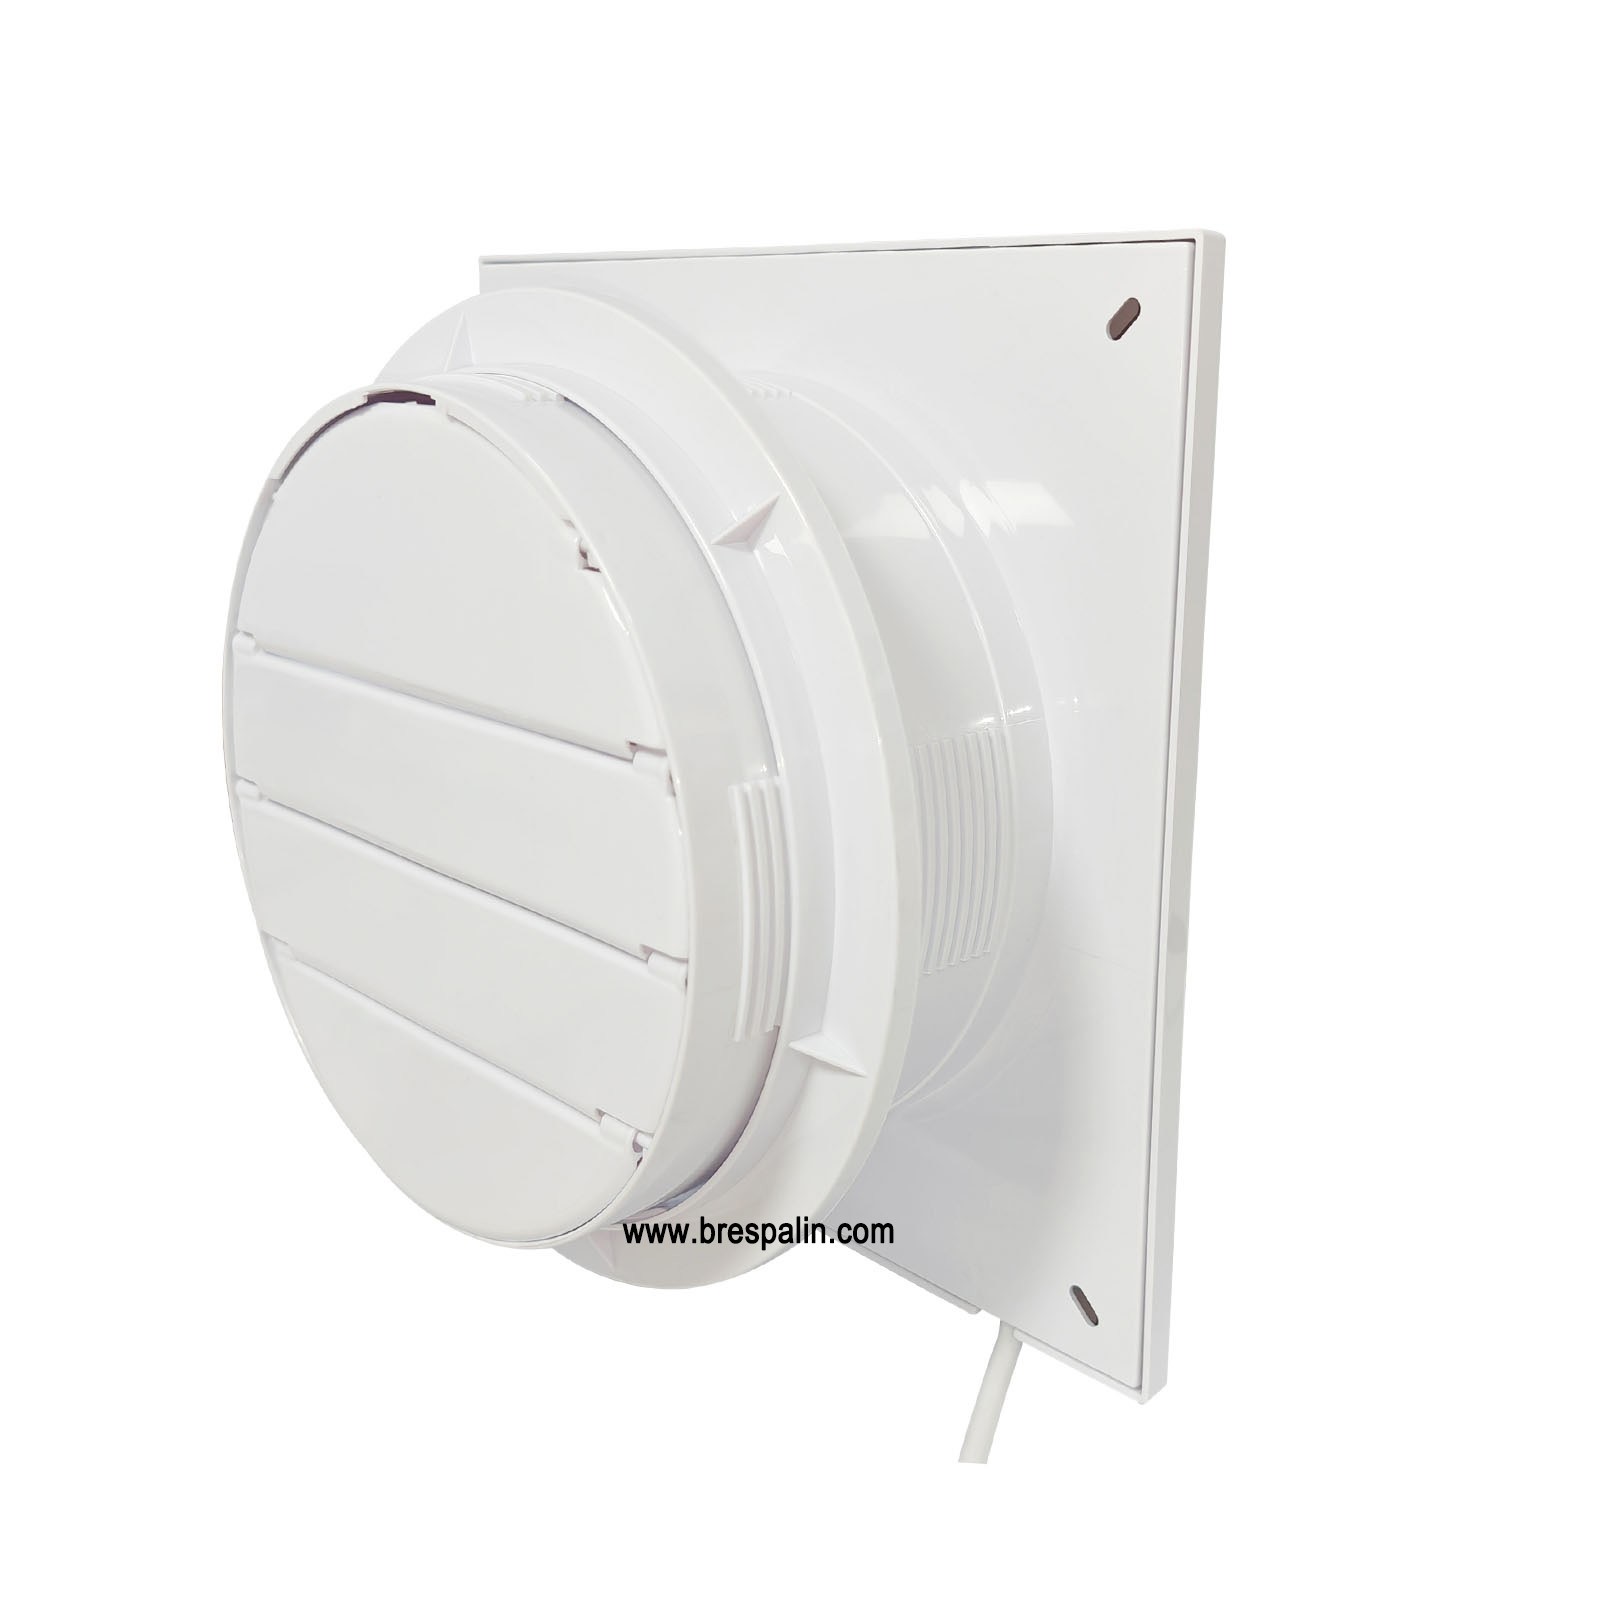 Air extractor Exhaust Fan with Shutter for Bathroom and Smoke room -  Wall/Window Exhaust Fan - BRESPALIN CO., LTD.